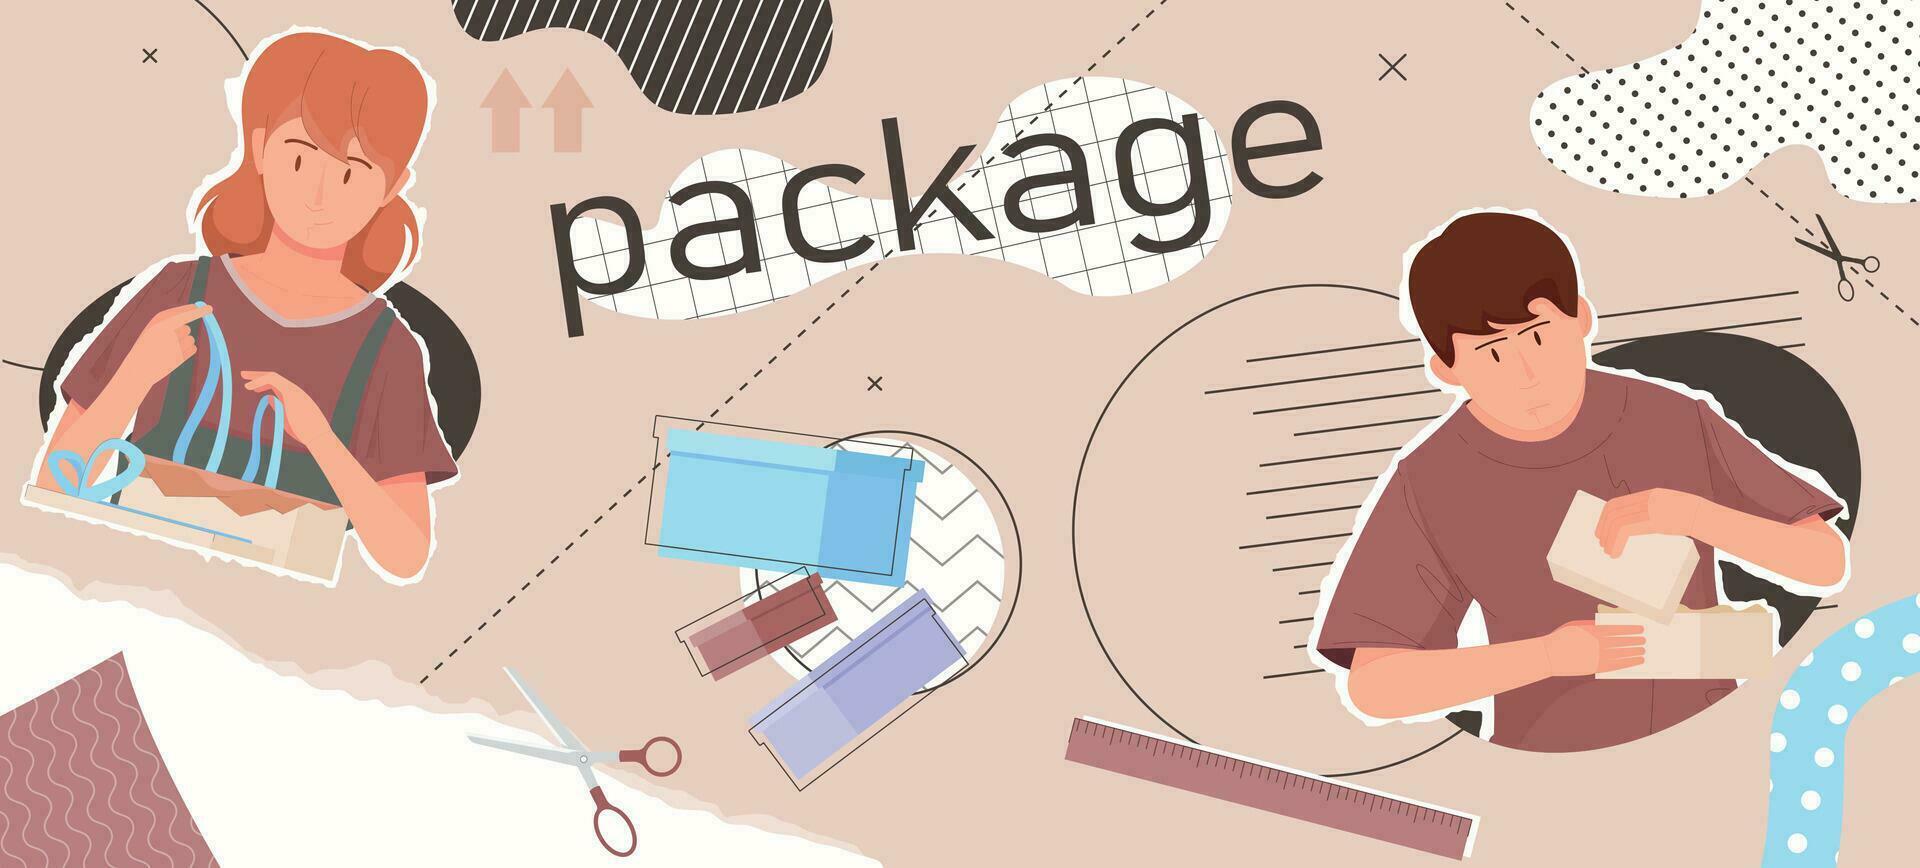 Product Package Collage Composition vector